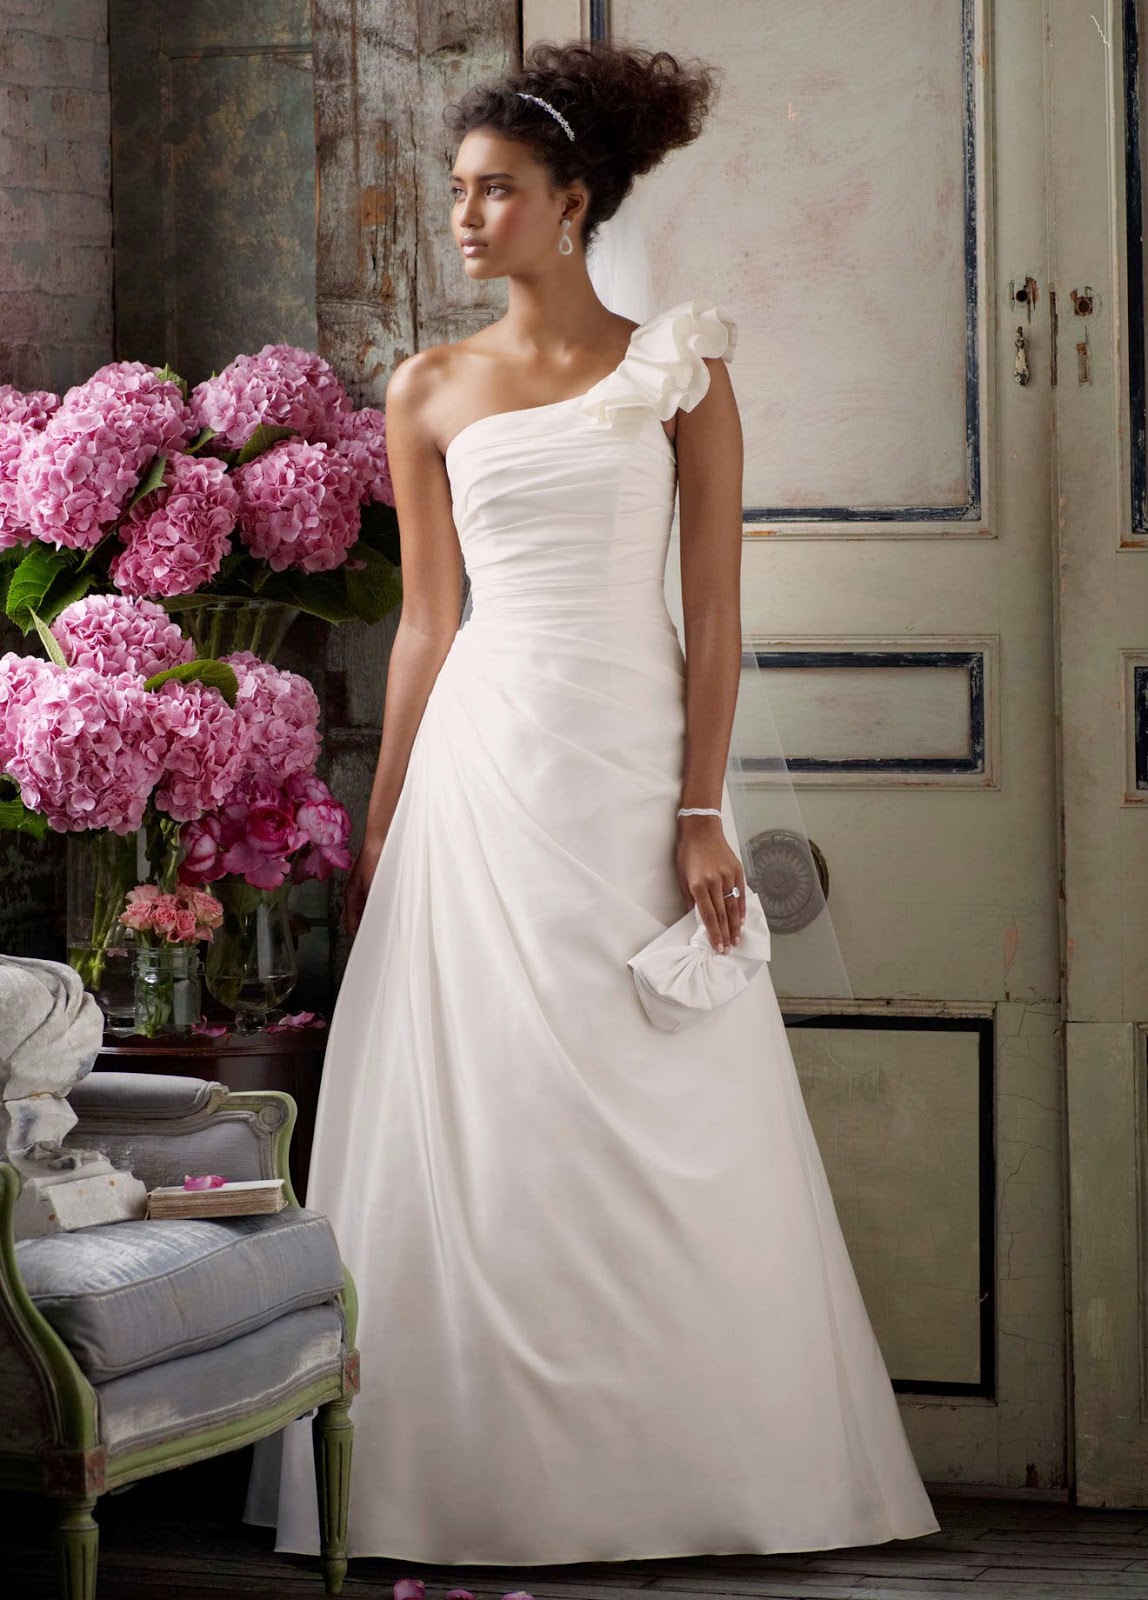 2019 Wedding  Dresses  and Trends